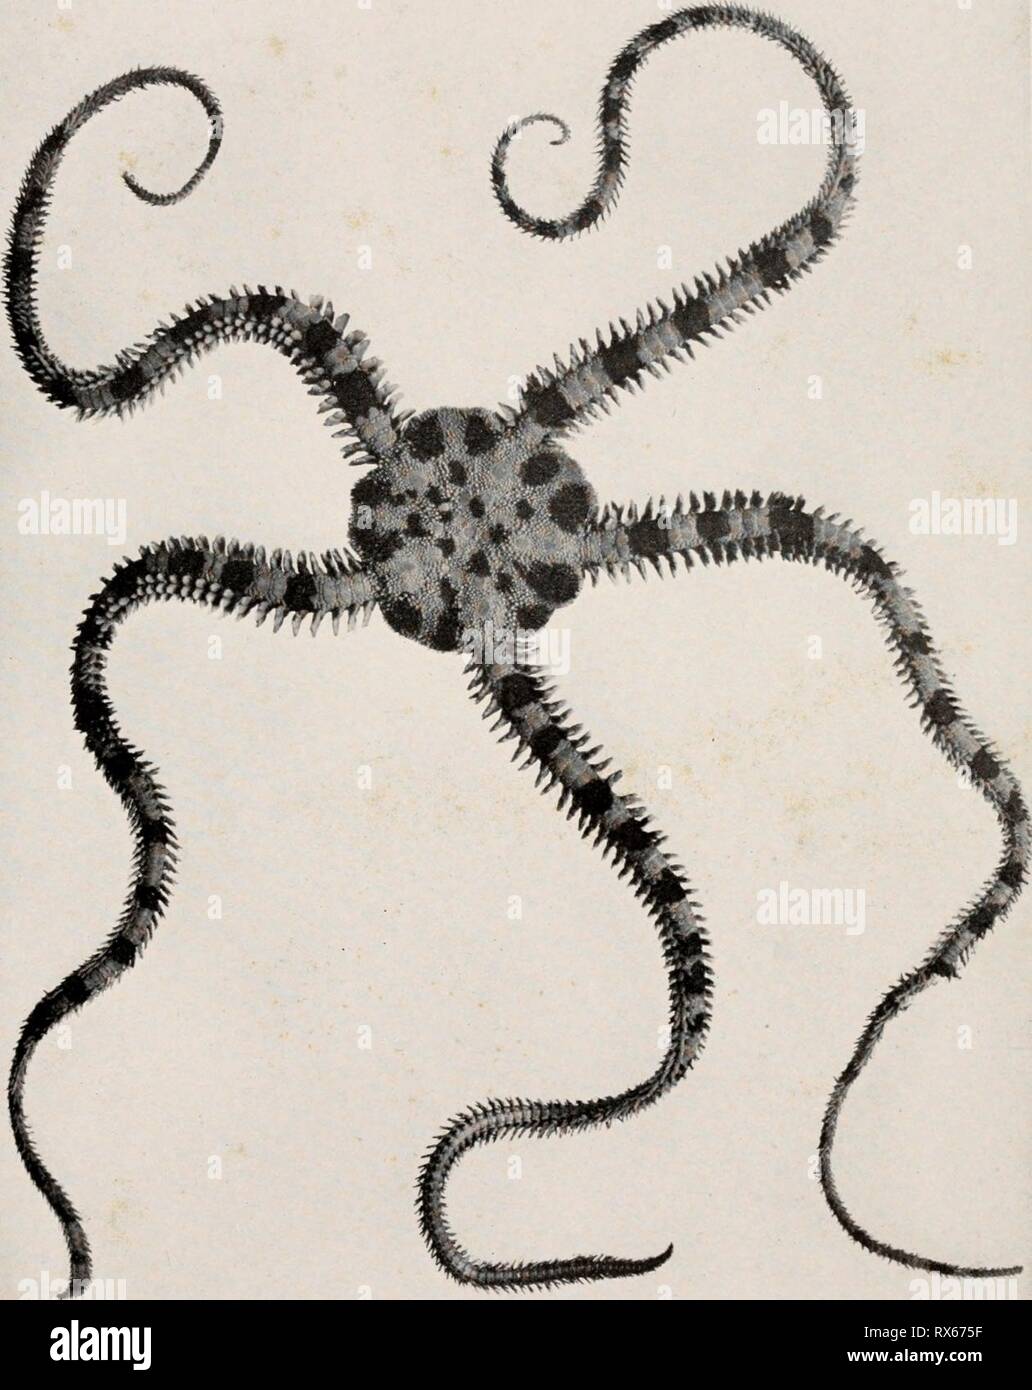 Echinoderms of Connecticut (1912) Echinoderms of Connecticut echinodermsofcon00coew Year: 1912  PLATE XVI. Daisy Brittle-star, Ophiopholis aculeata. (One and one-half times natural size.) Stock Photo